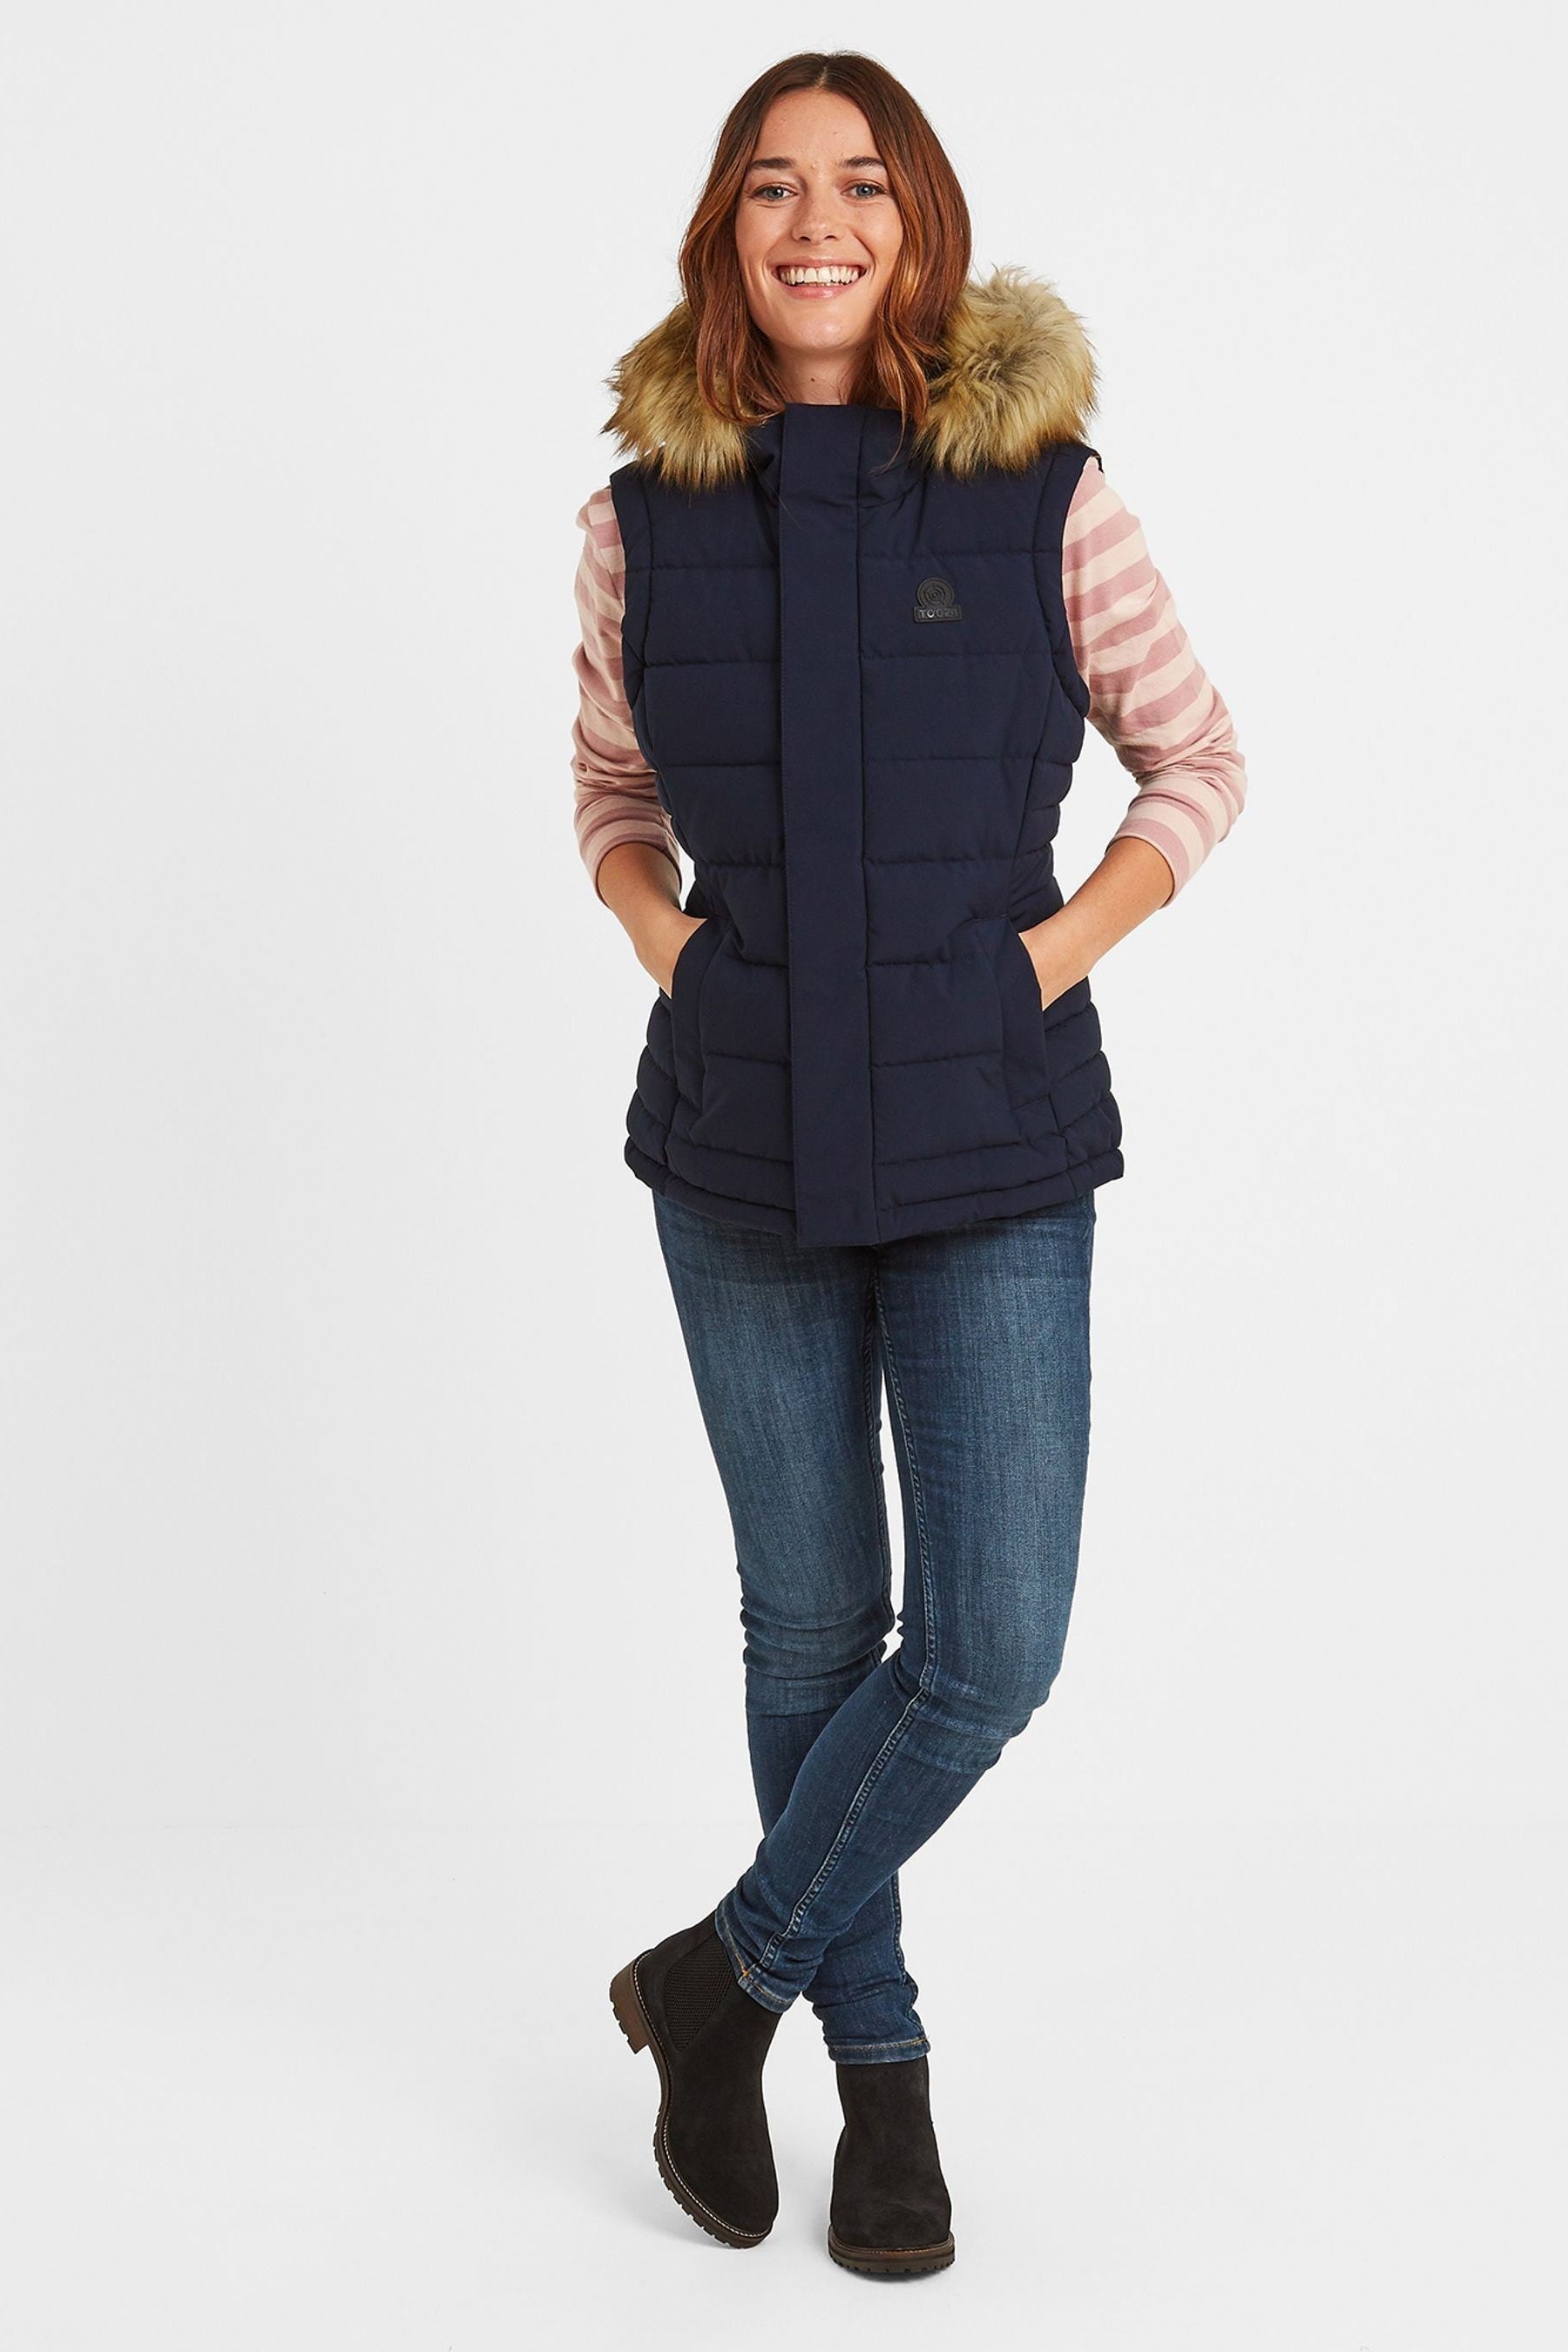 Buy Tog 24 Blue Cowling Womens Insulated Gilet from the Next UK online shop